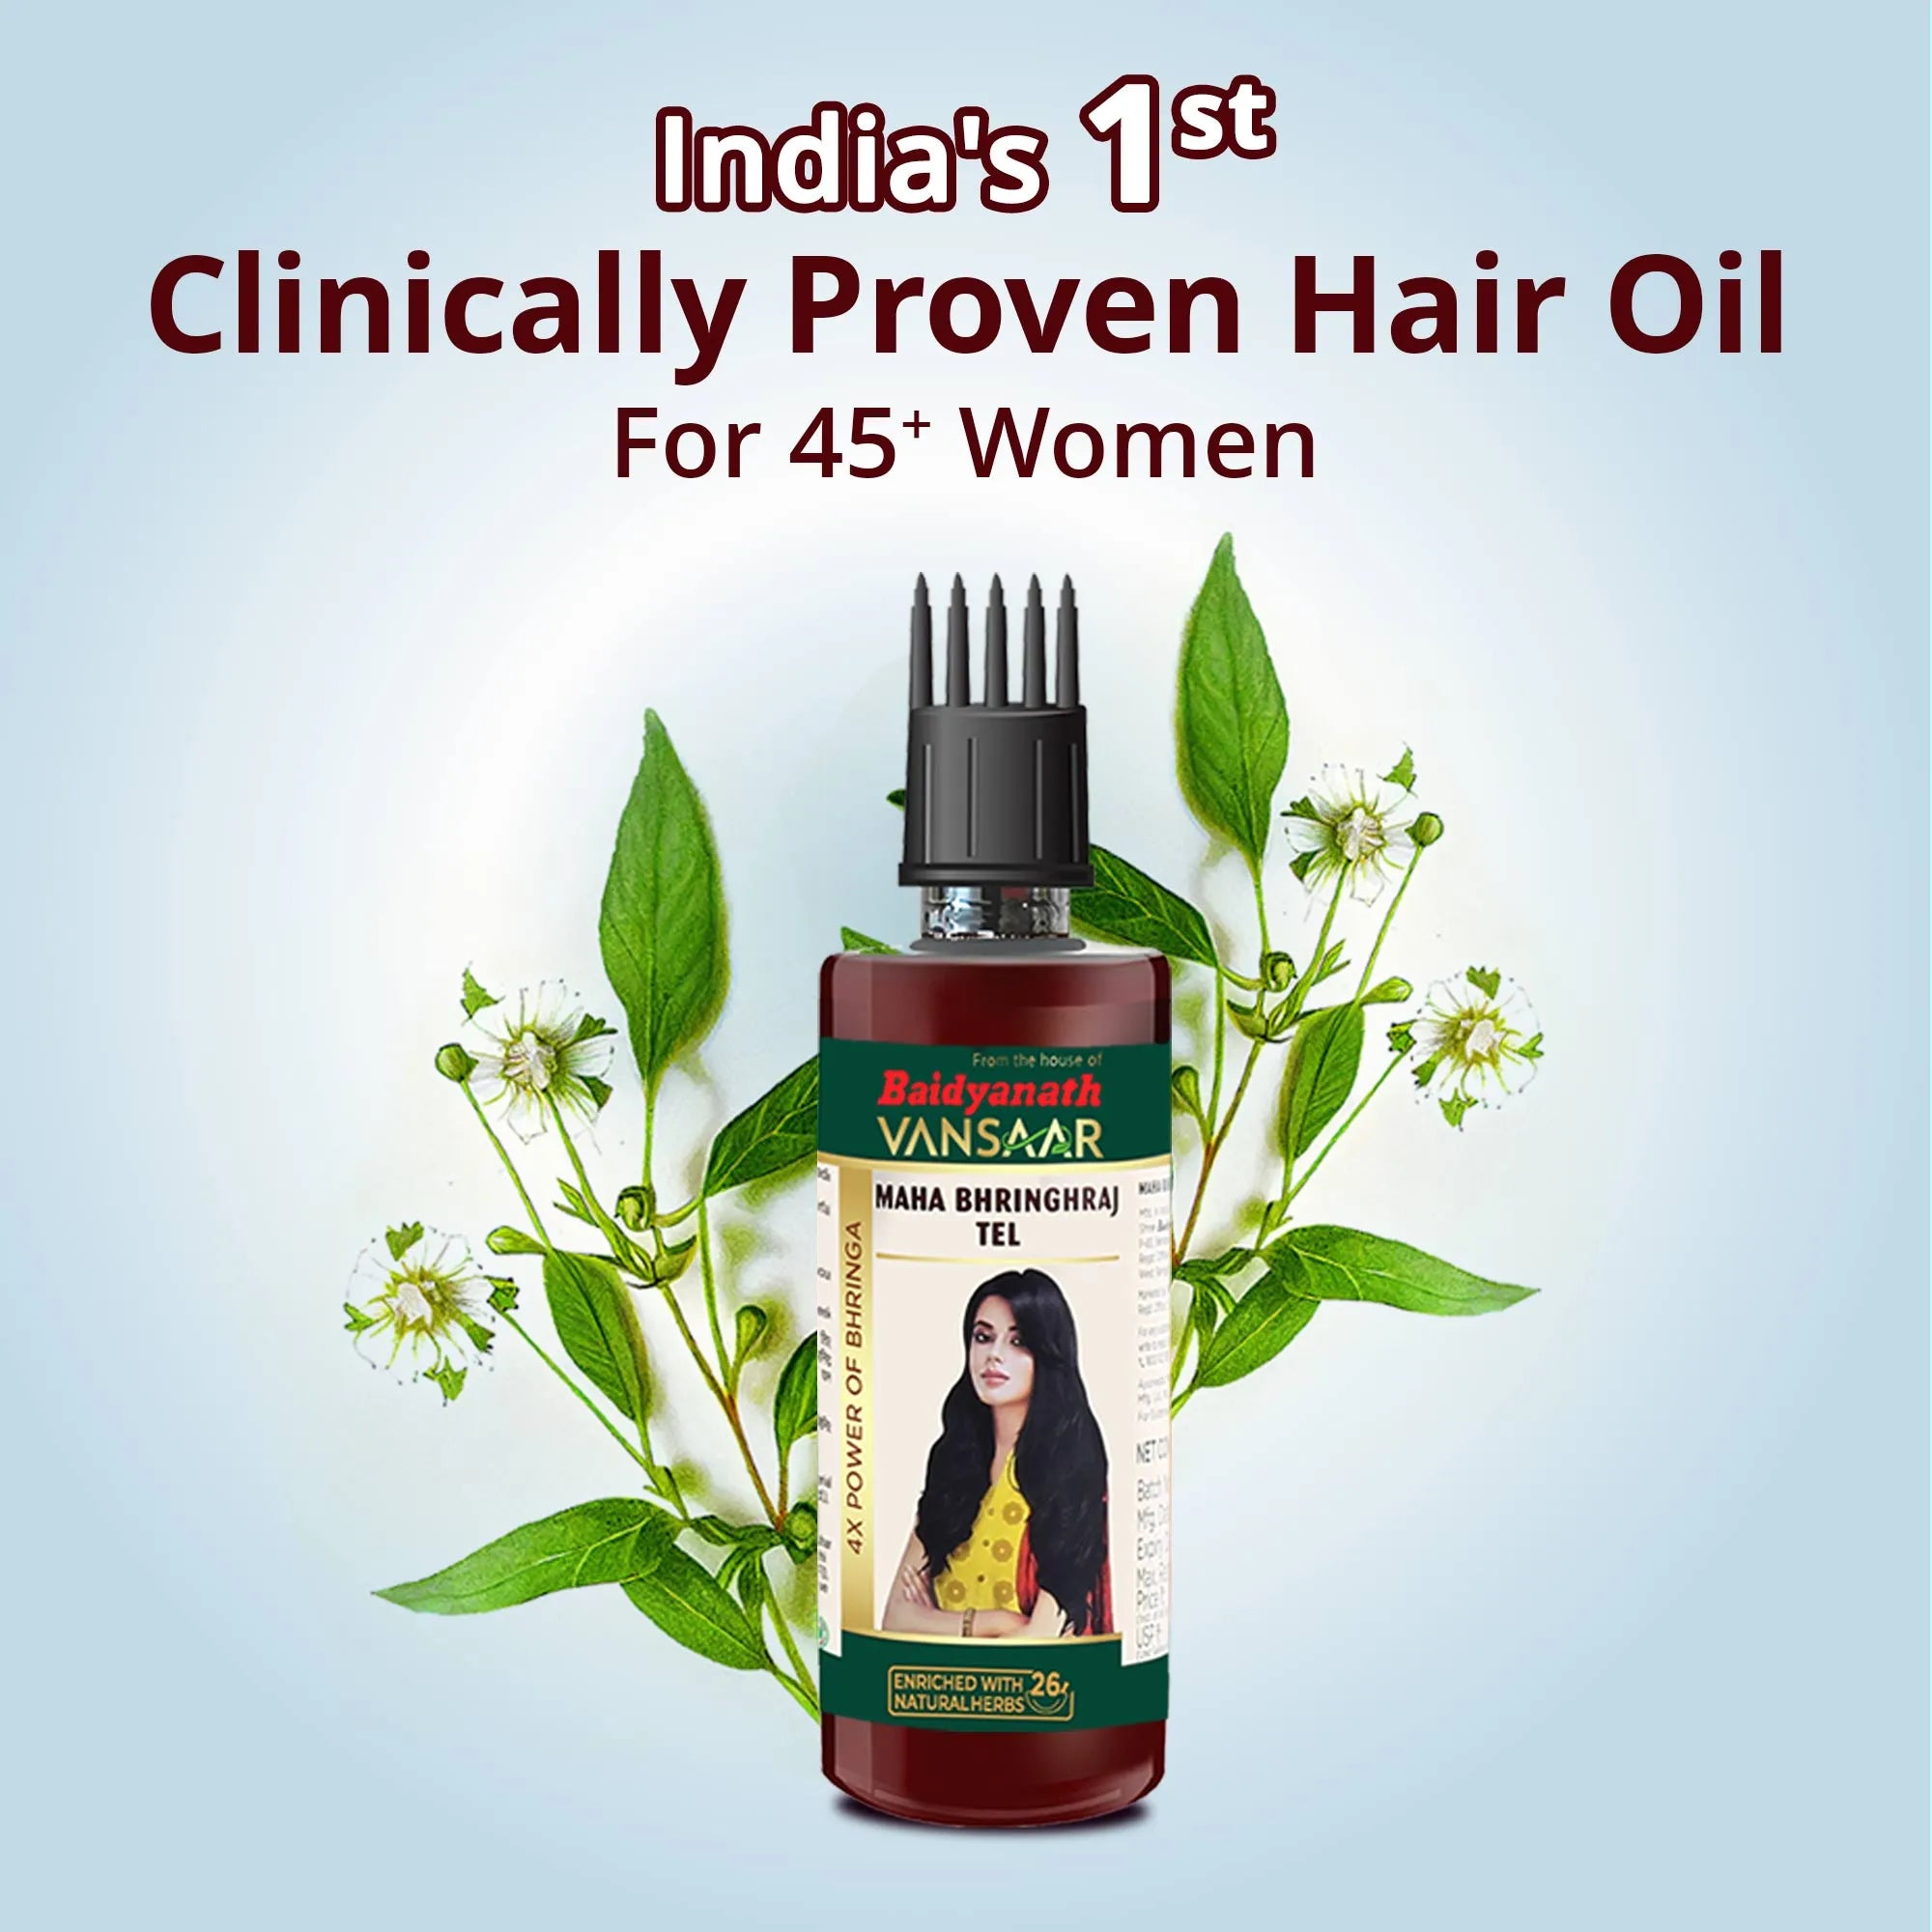 Maha Bhringhraj Hair Oil | Clinically Proven to Reduce Hair Fall By 20% in 45+ Women | With Comb Applicator - Vansaar